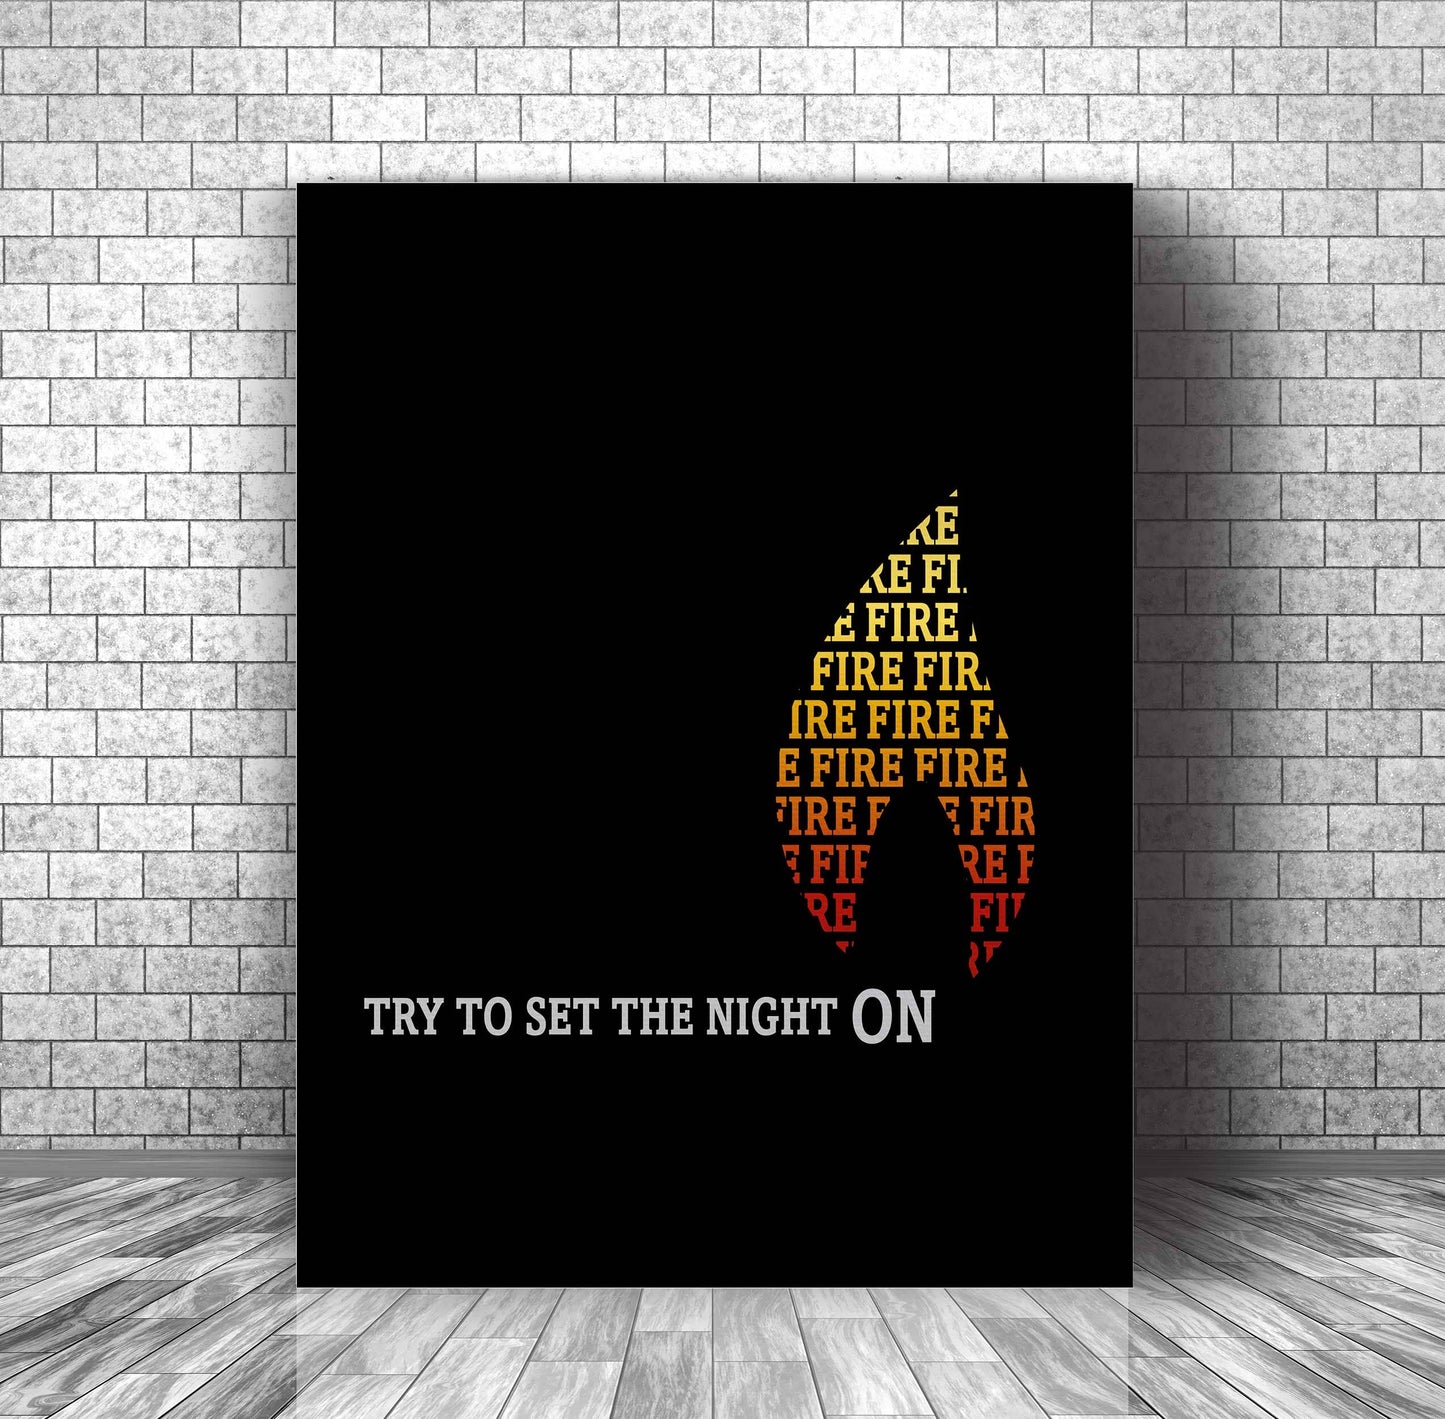 Light my Fire by The Doors - 60s Song Lyric Music Poster Art Song Lyrics Art Song Lyrics Art 11x14 Canvas Wrap 